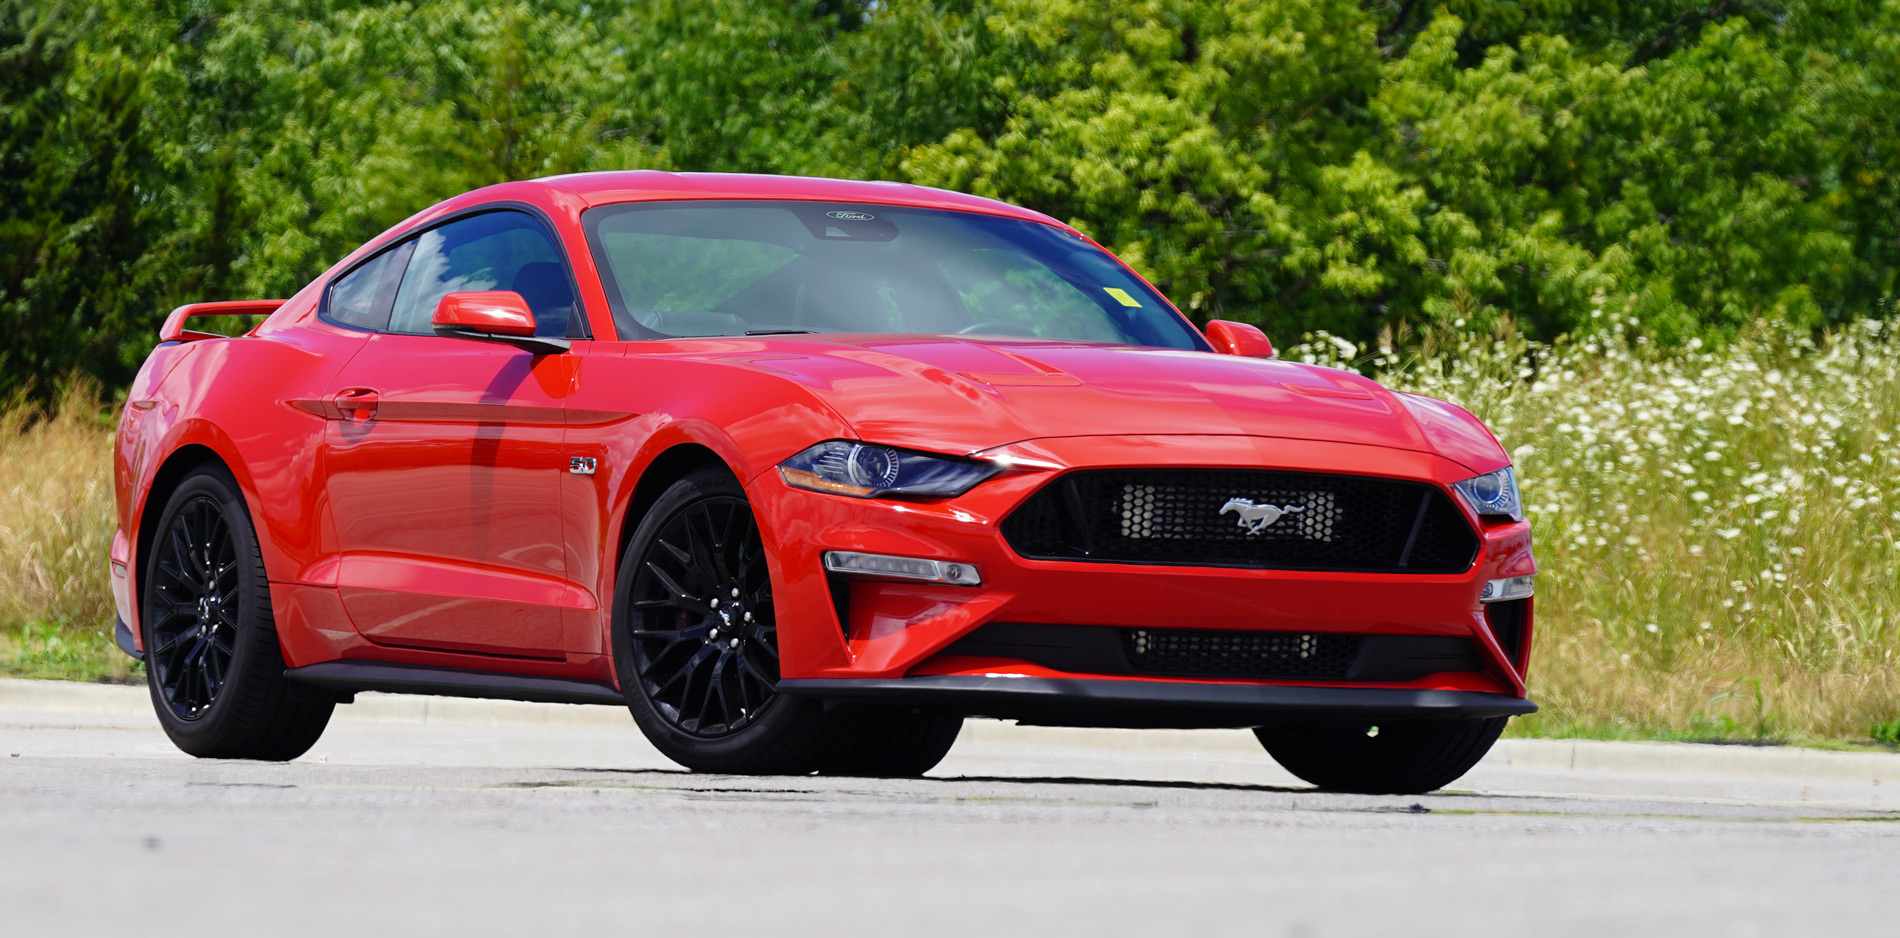 Supercharger kits for 2022 Mustangs